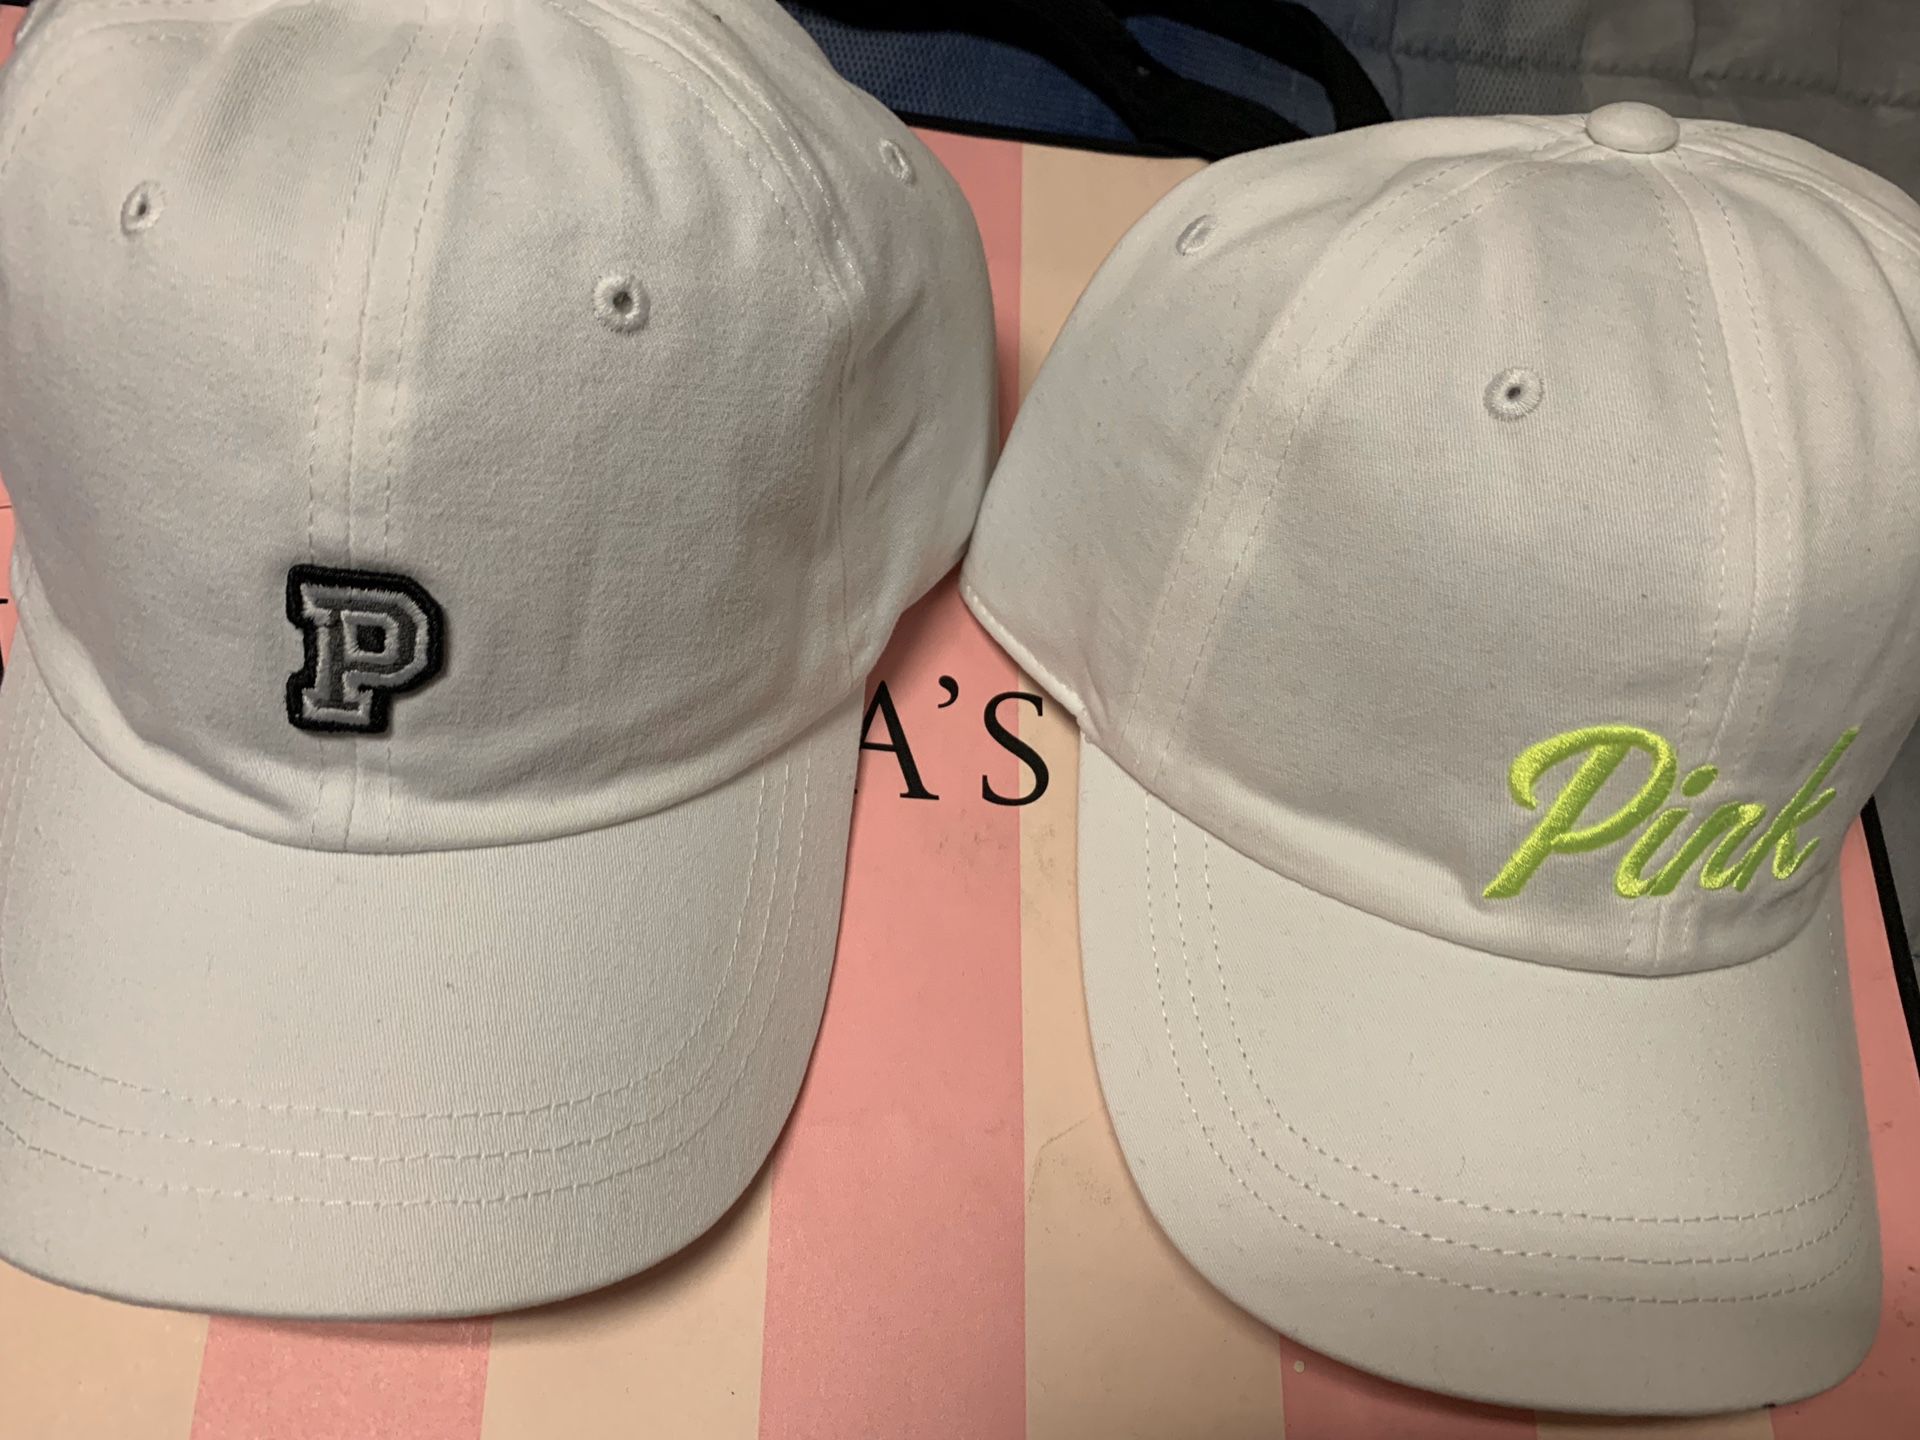 New pink hats